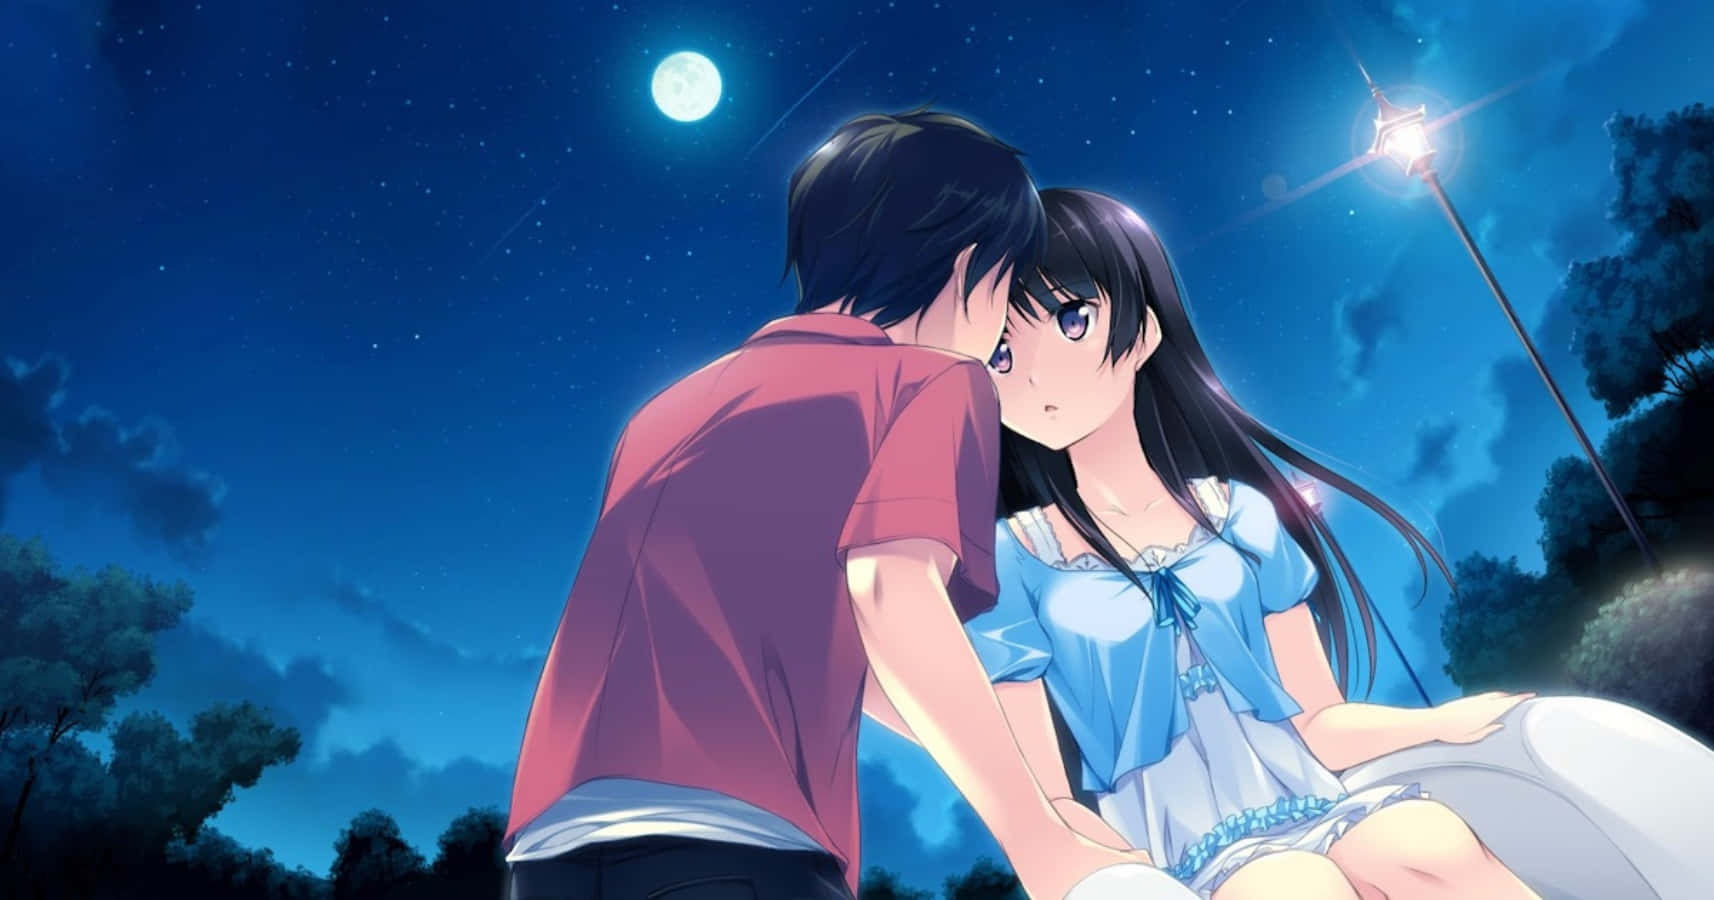 Anime Kissing Drawing Wallpapers - Wallpaper Cave